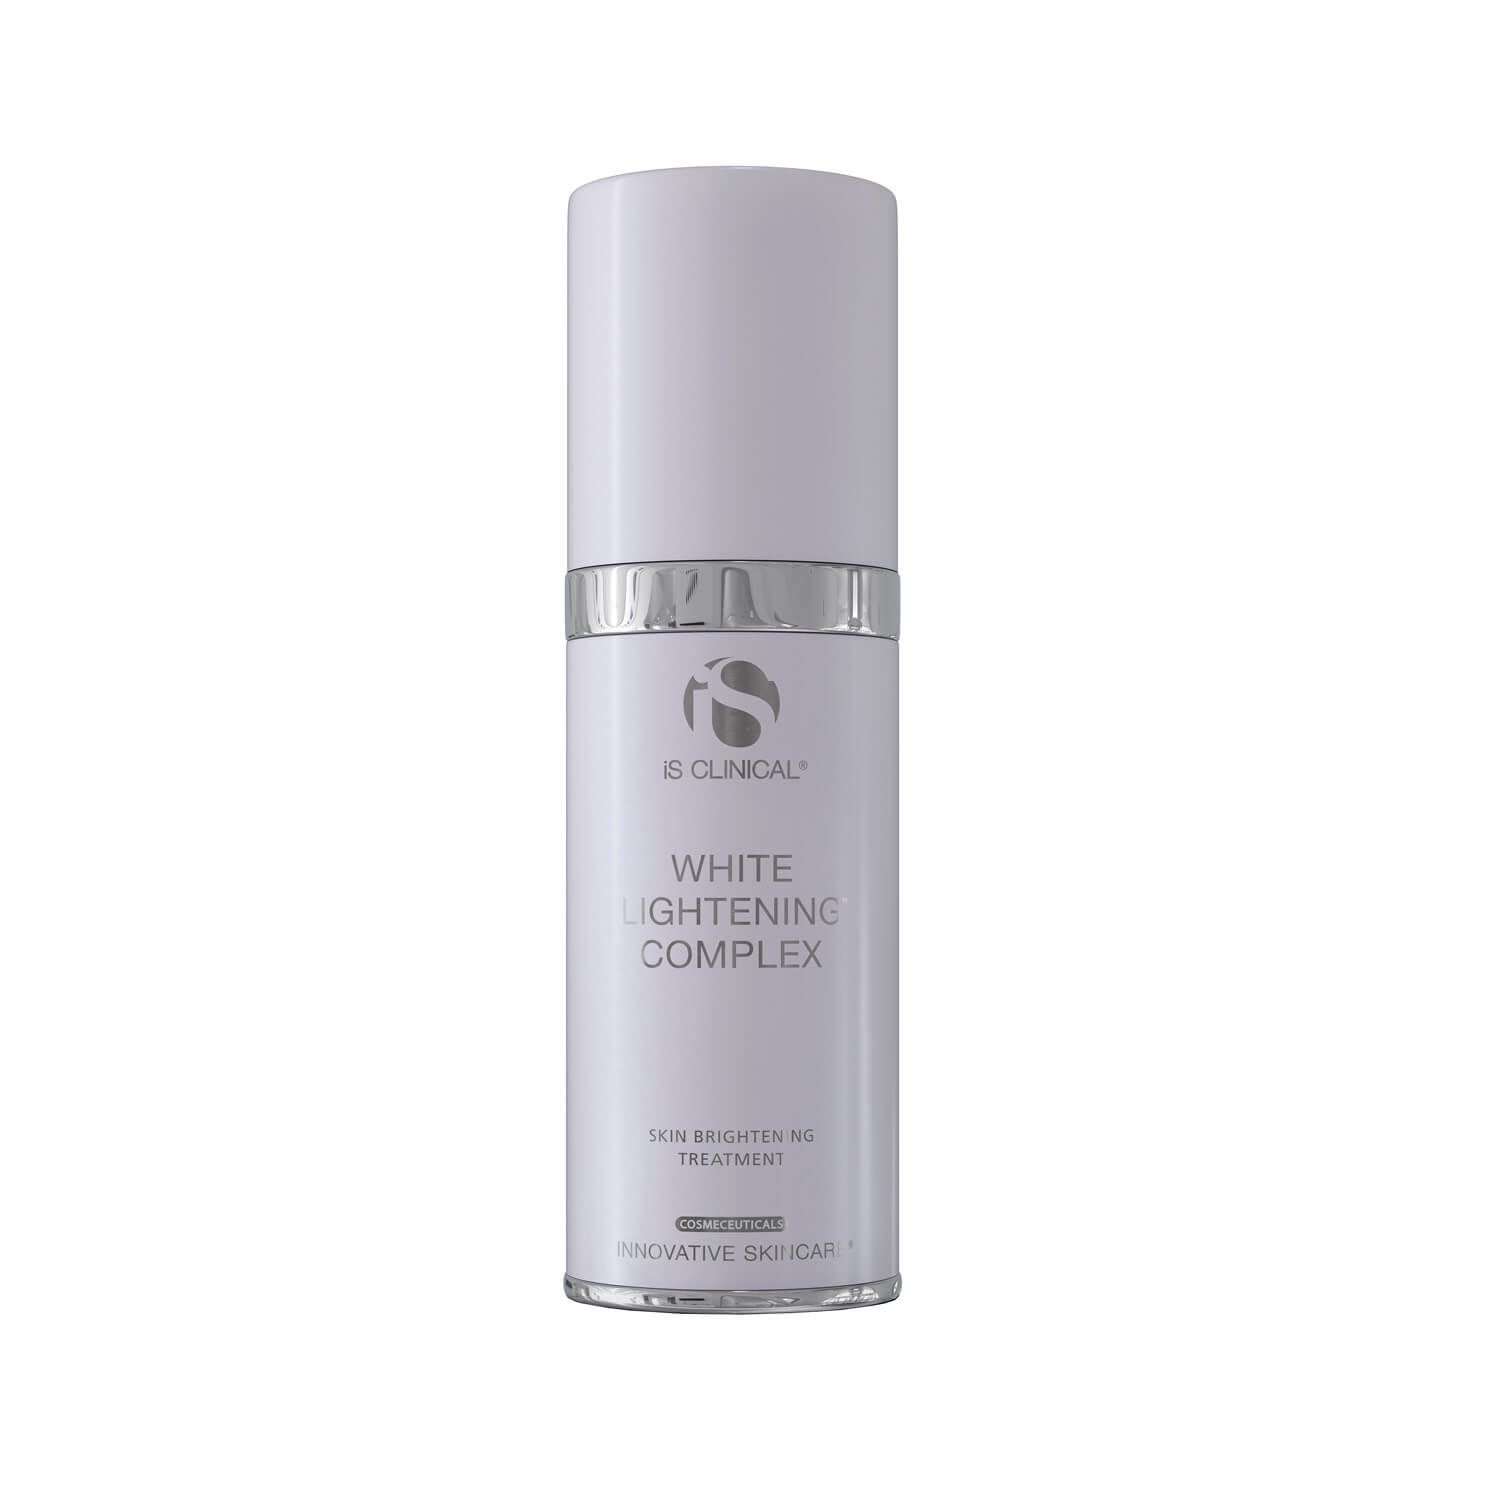 iS Clinical White Lightening Complex | Skinstore